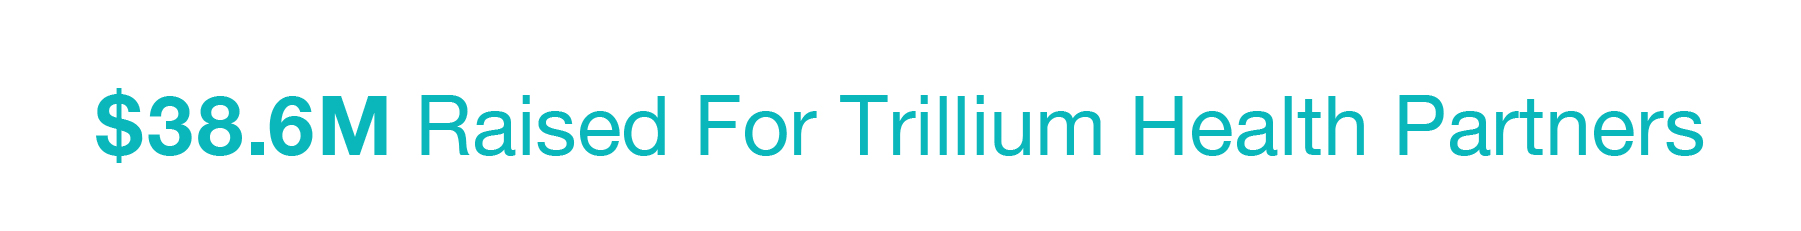 $38.8 Raised for Trillium Health Partners. ($22.4M in contributions + $16.4M in future commitments = $38.8M total amount raised from fundraising activities.